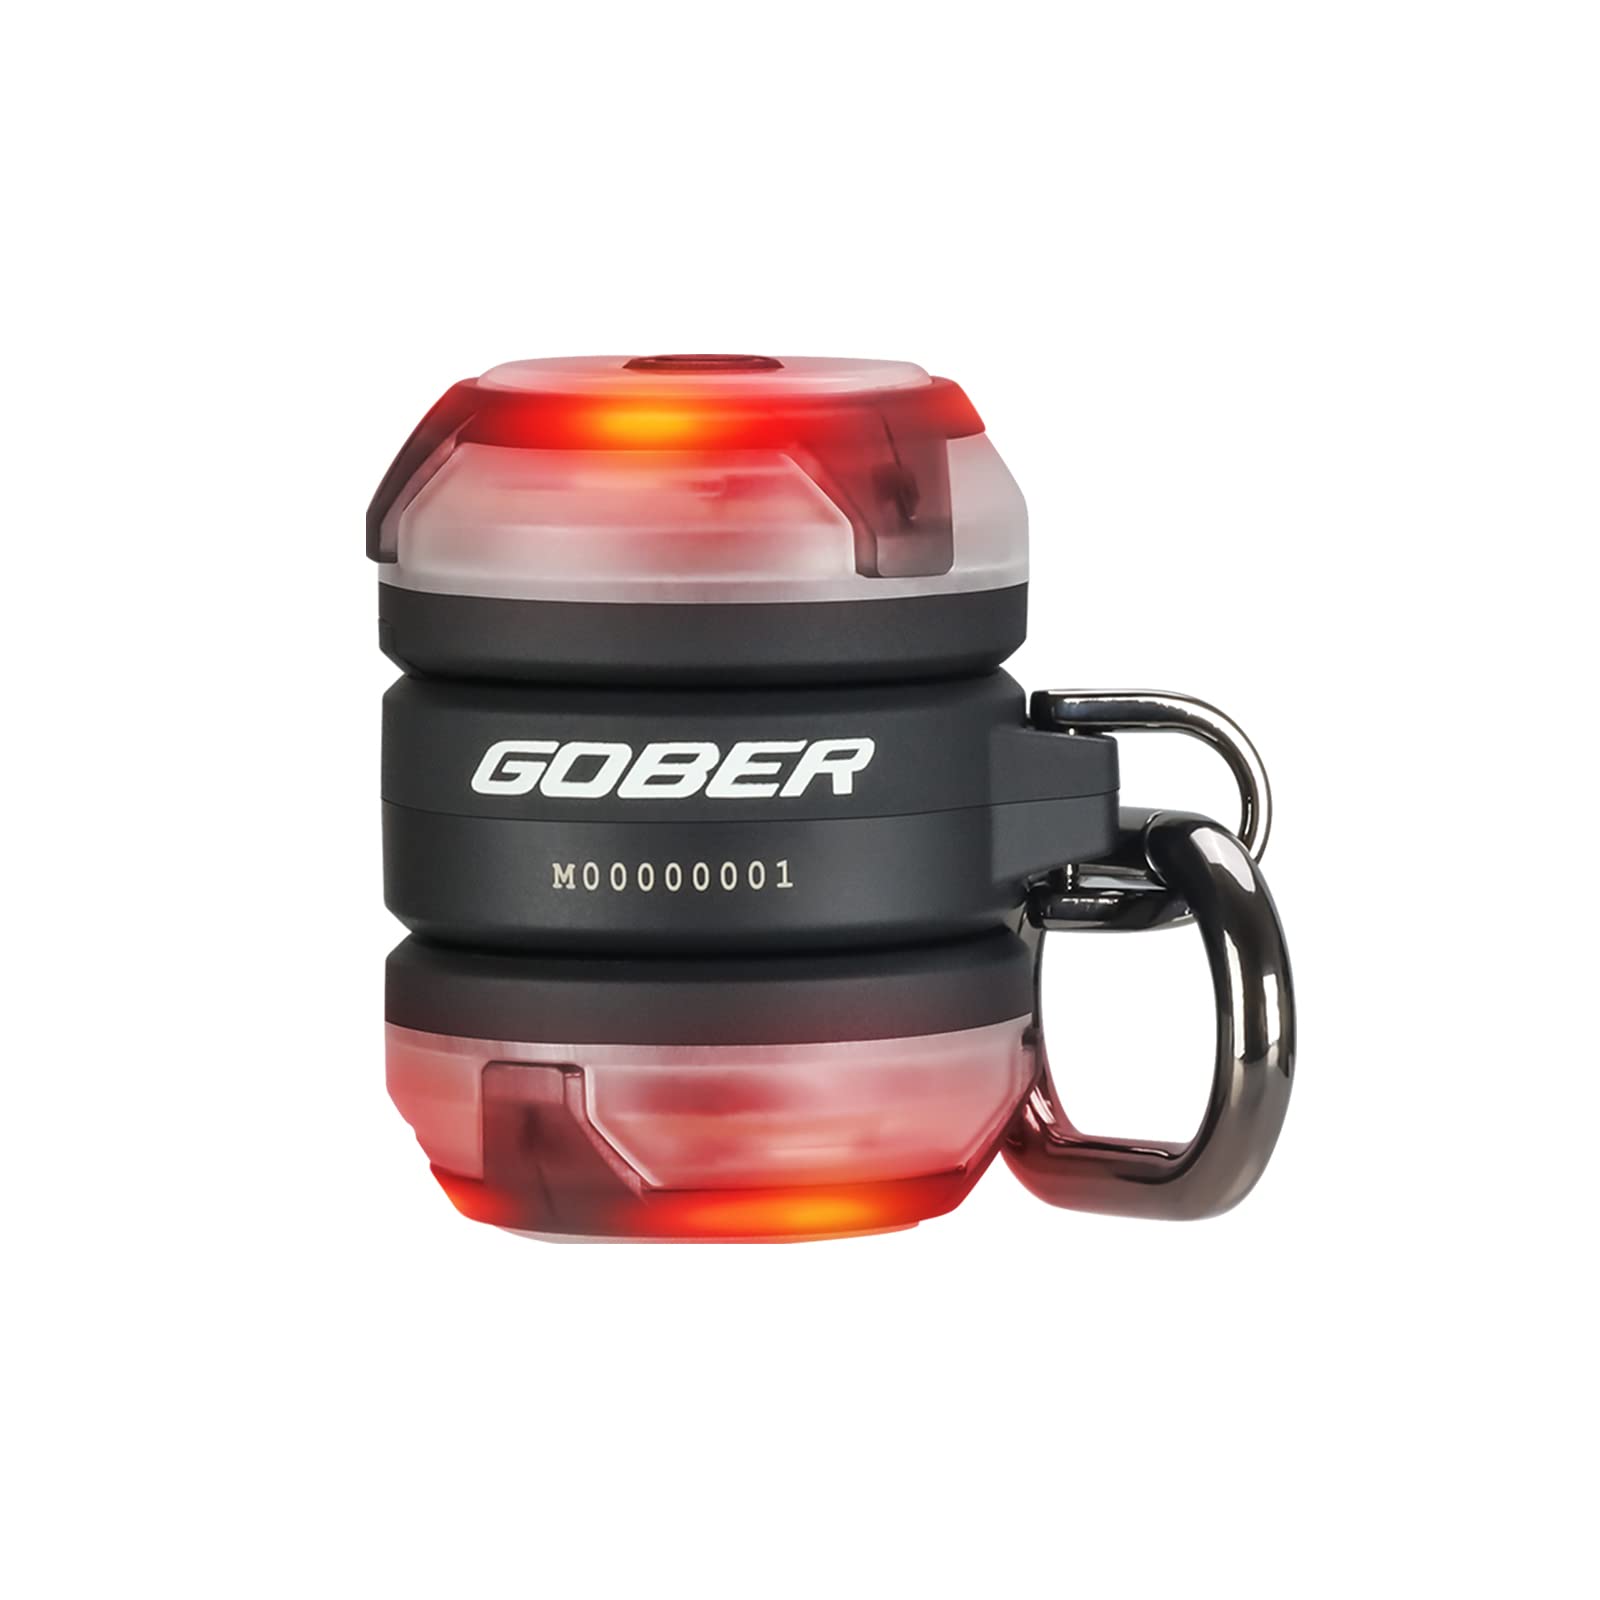 OLIGHT Gober Kit Safety Night Light, High Visibility LED Beacon Lights with 4 Lighting Modes, USB-C Rechargeable Flashing Warning with Clip for Running, Cycling, Camping, Dog Walking at Night (Black)